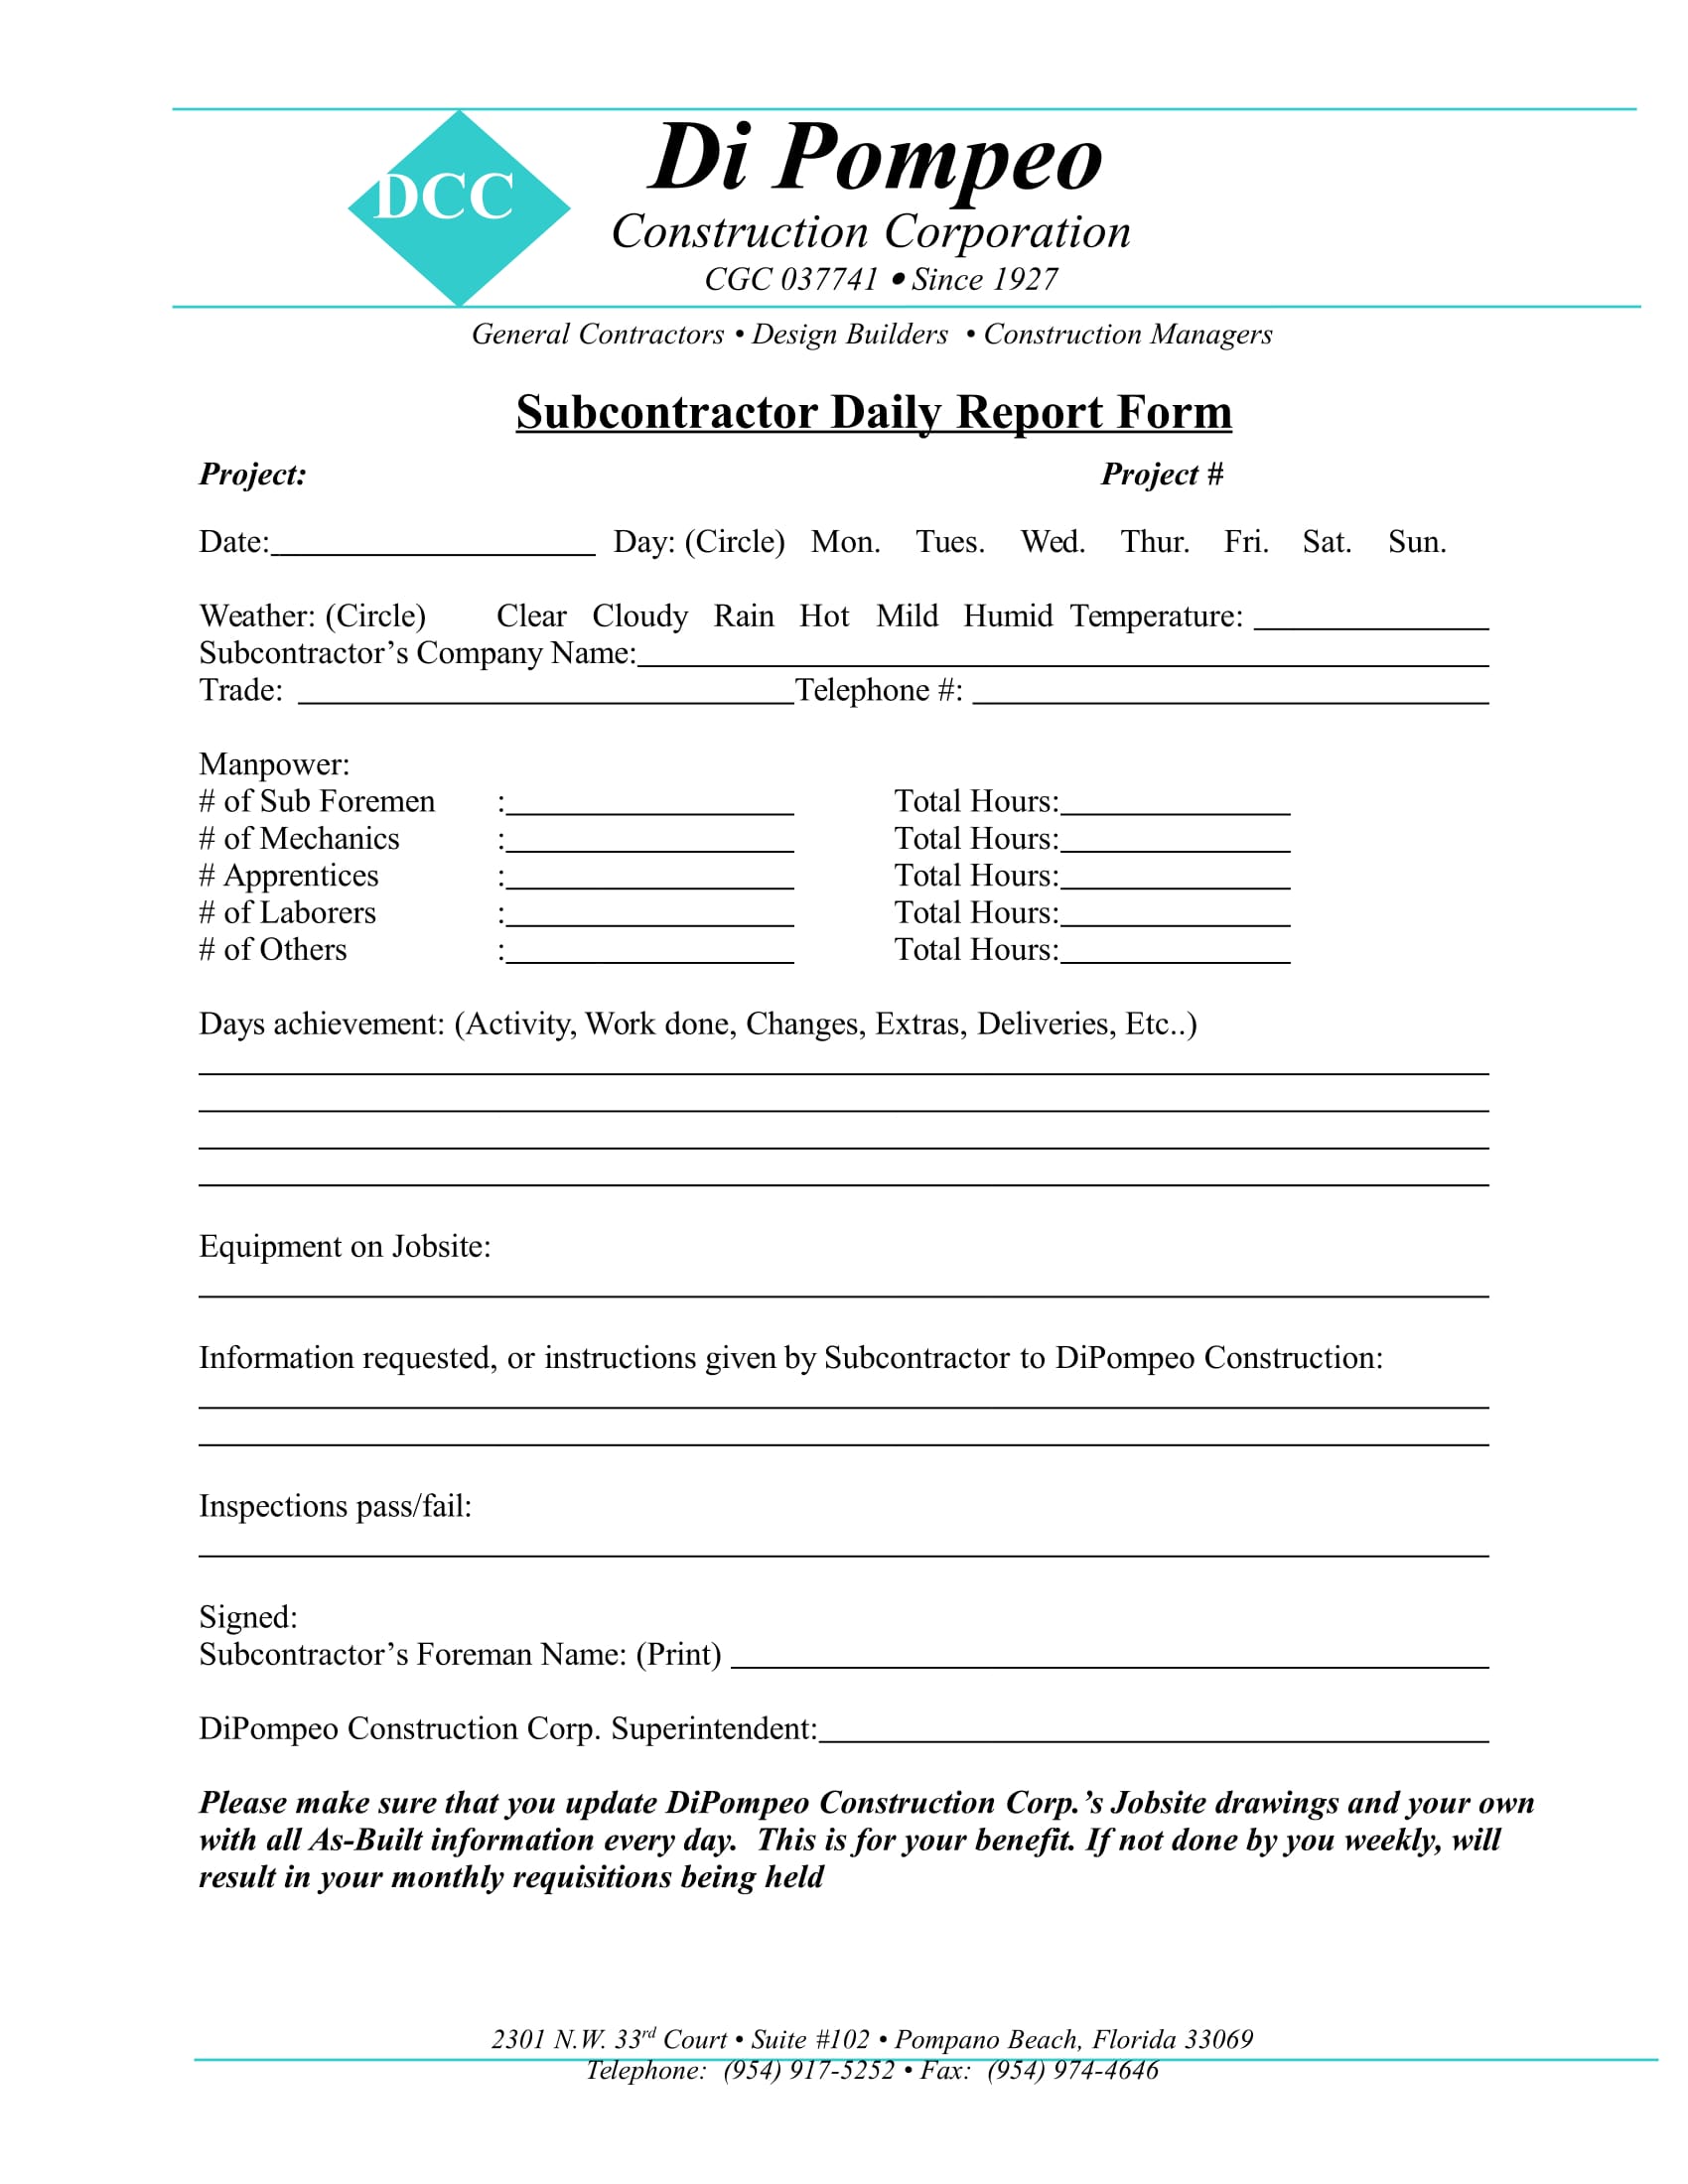 subcontractor daily report form 1